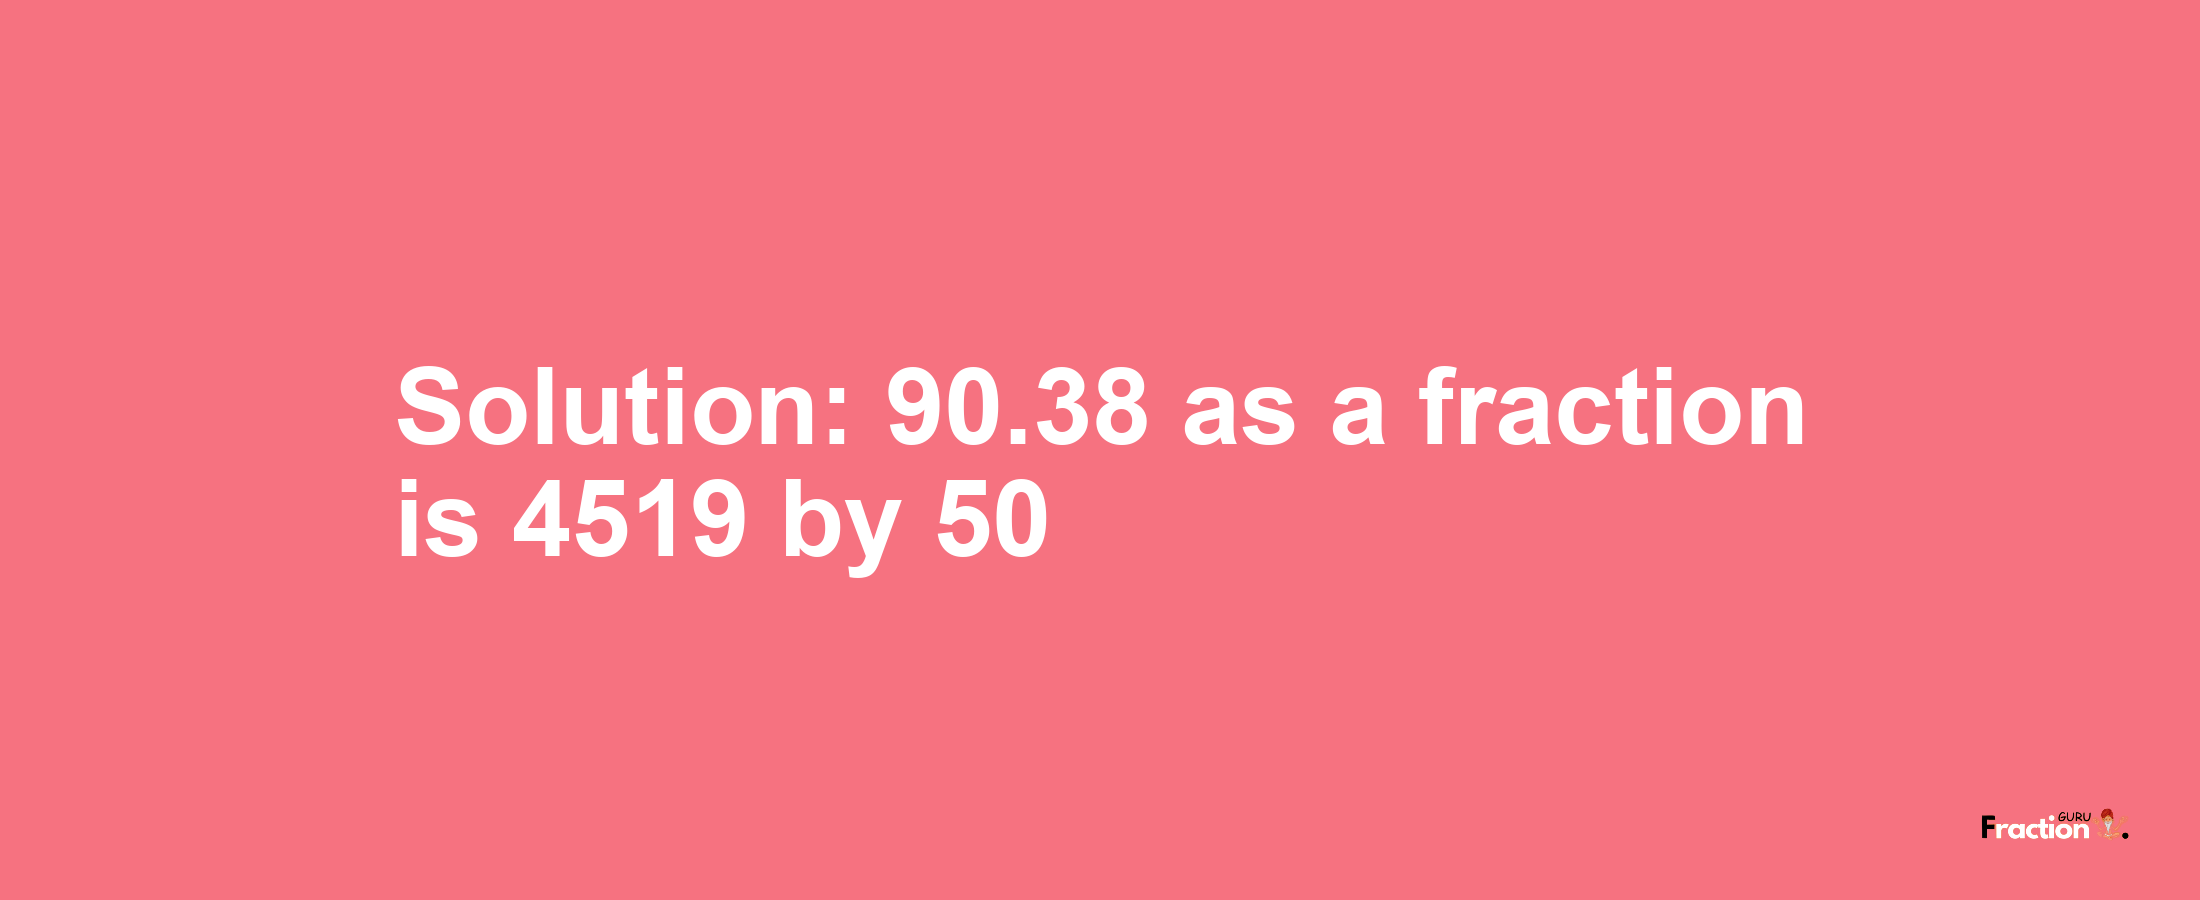 Solution:90.38 as a fraction is 4519/50